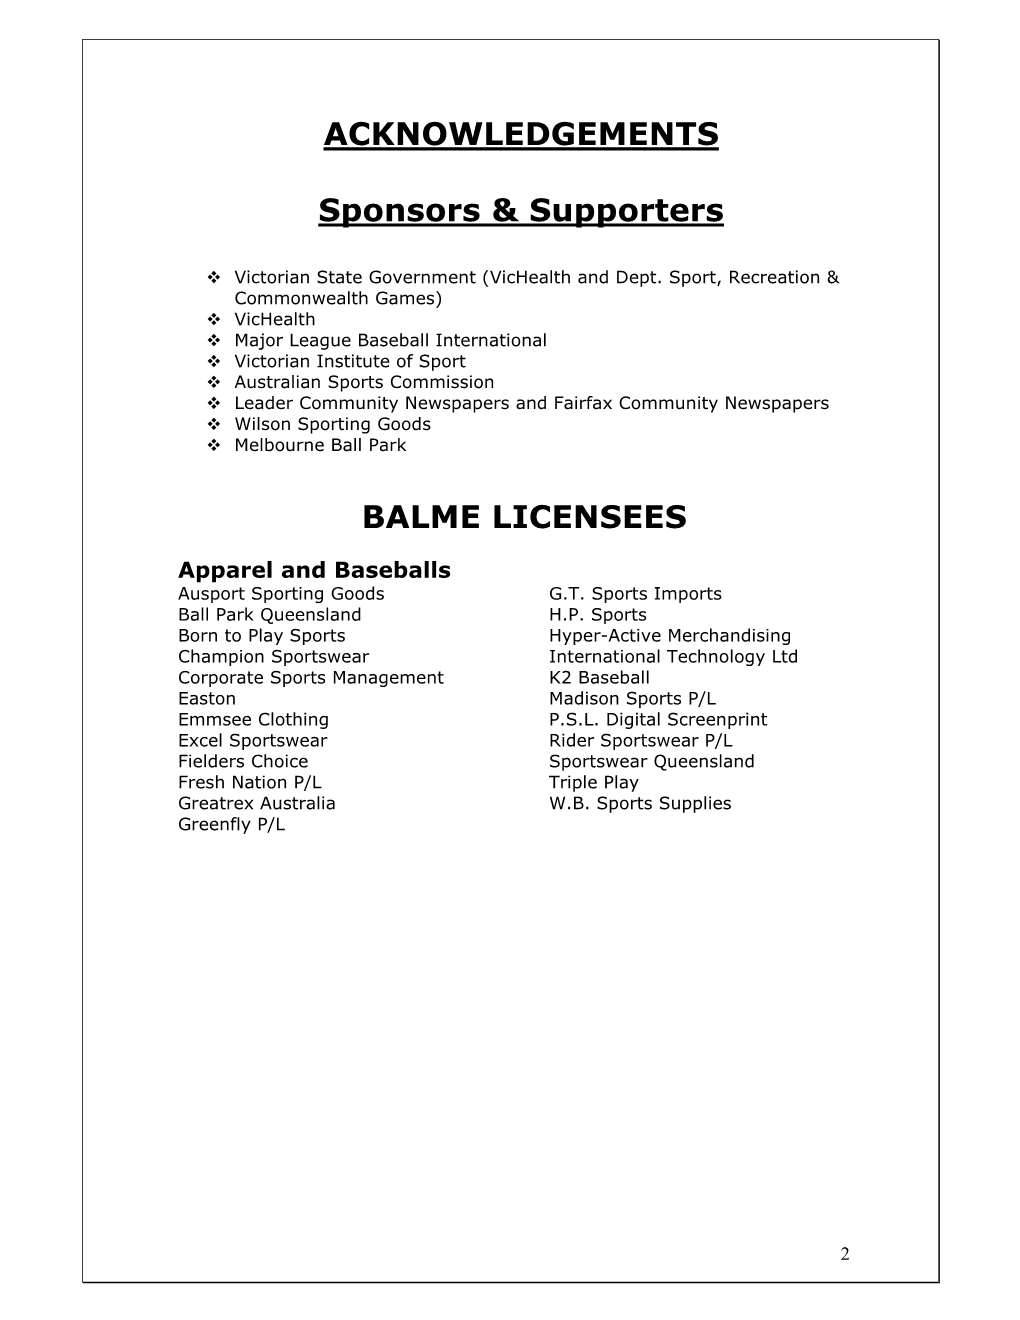 ACKNOWLEDGEMENTS Sponsors & Supporters BALME LICENSEES